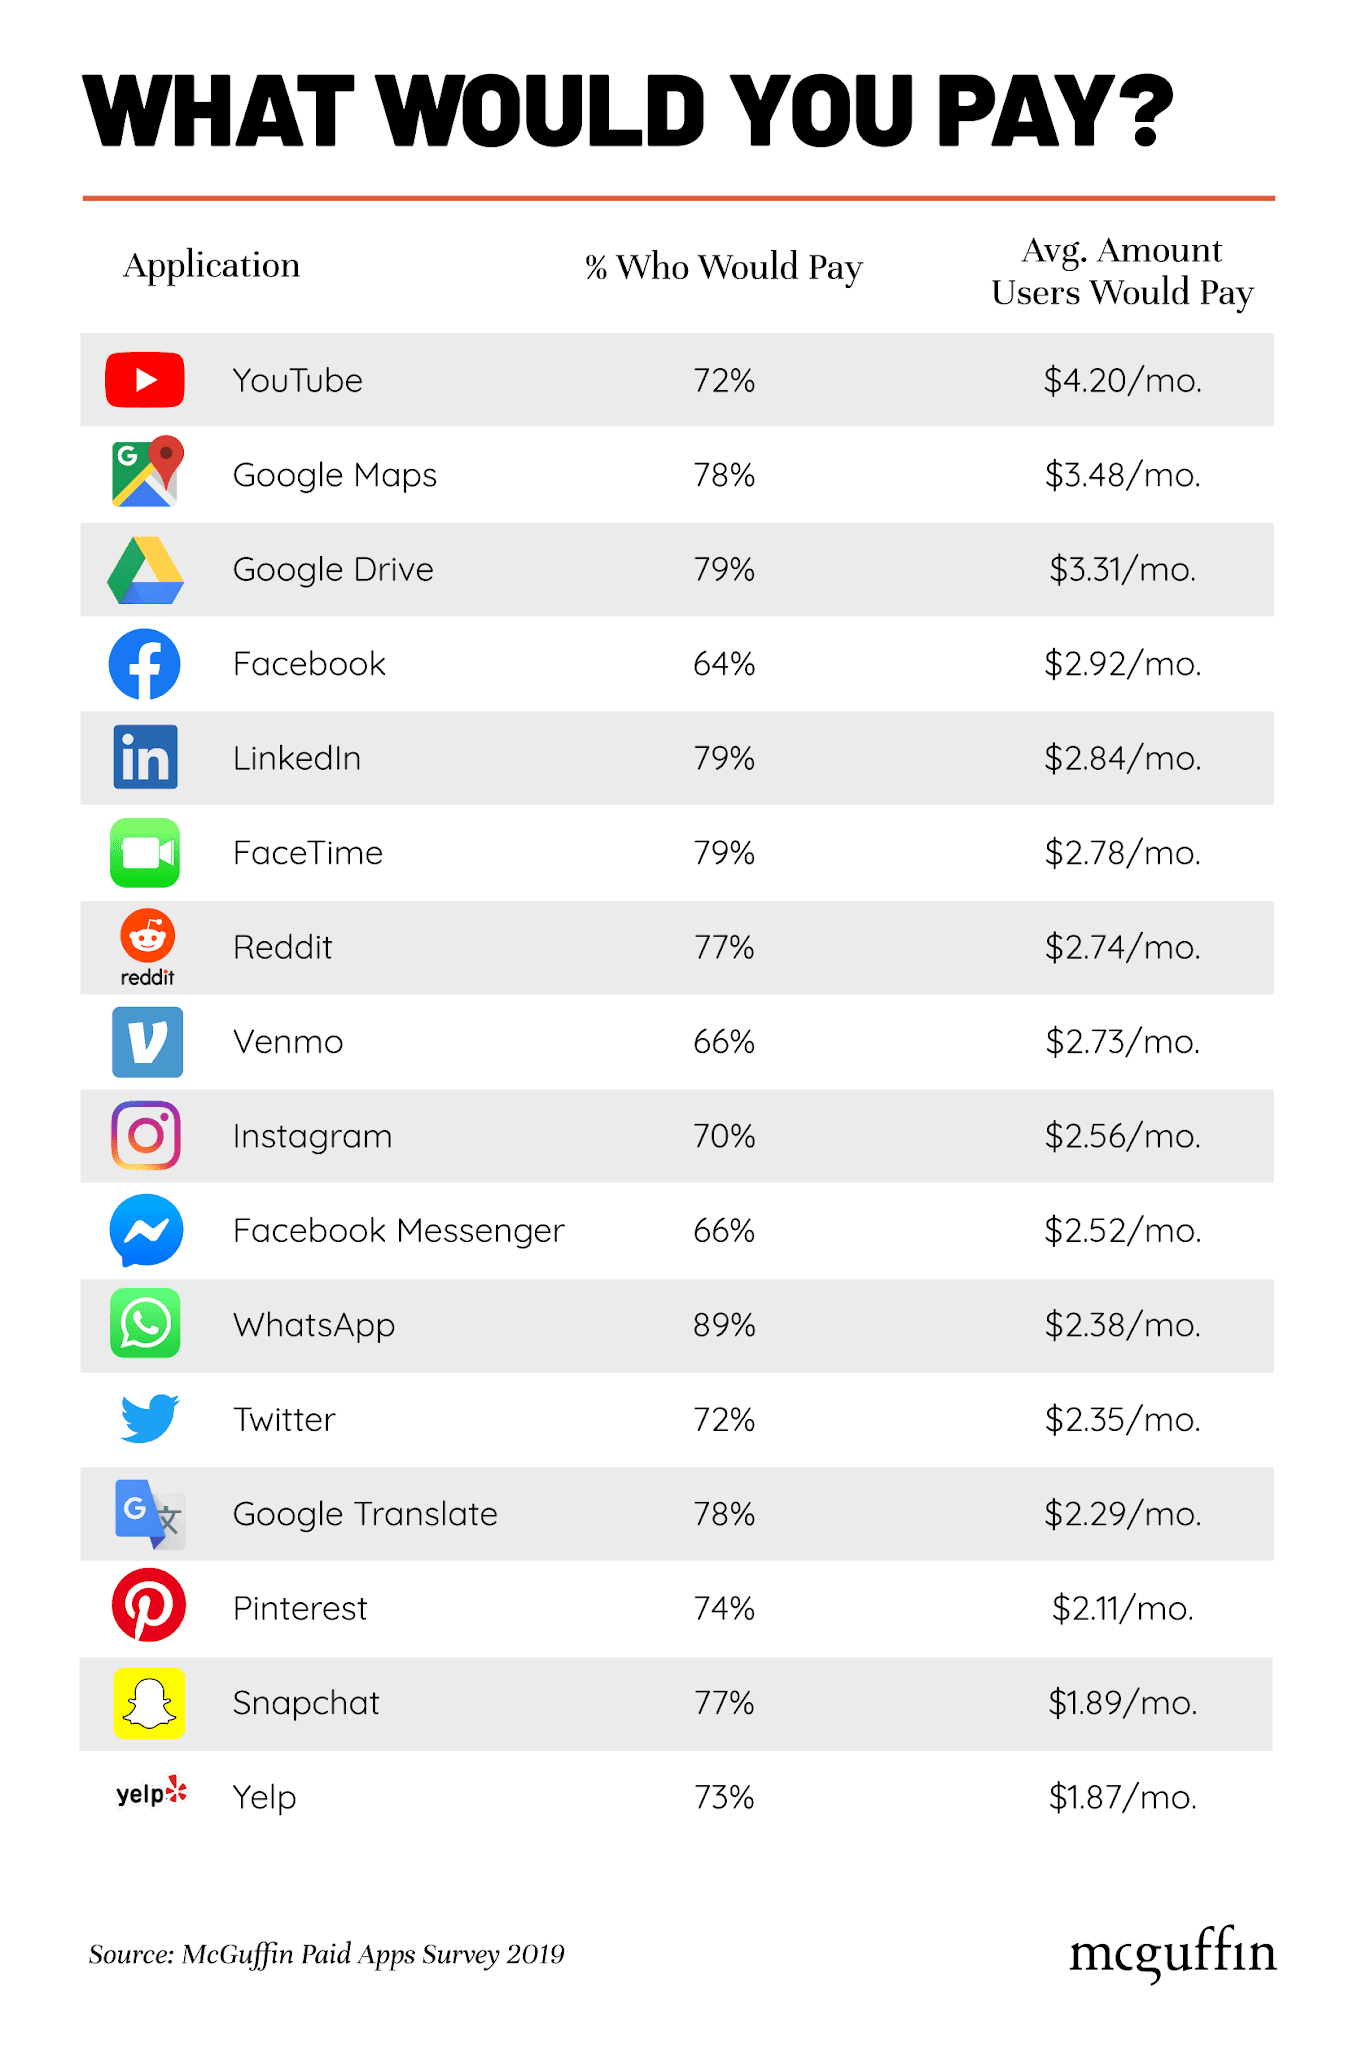 Studies show the price users would pay to use popular social media apps